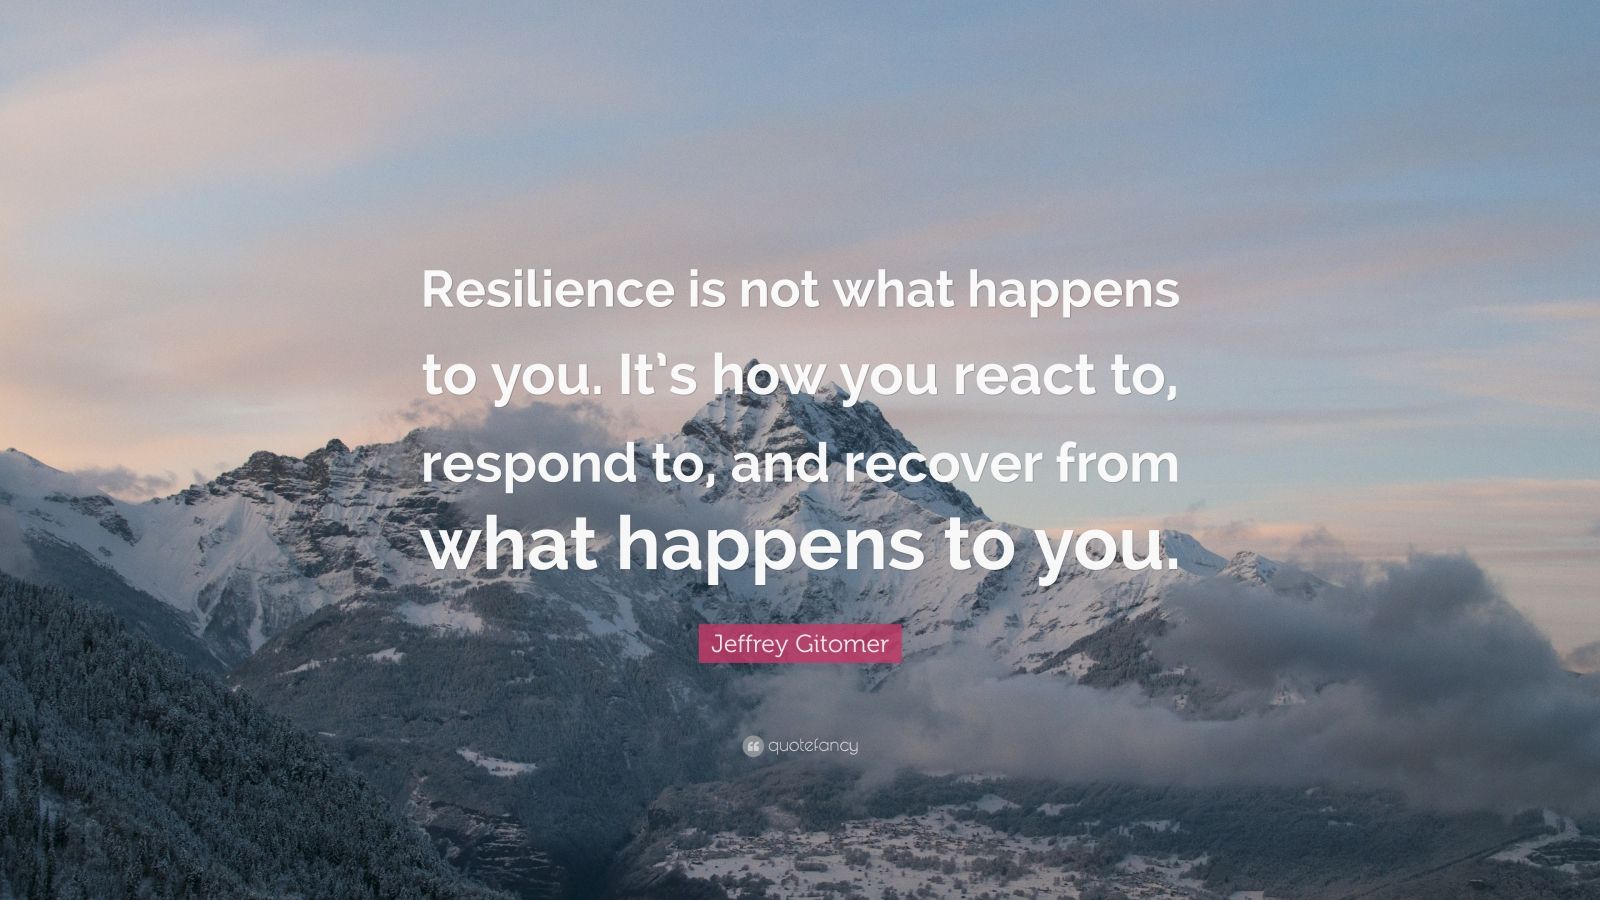 Jeffrey Gitomer Quote: “Resilience is not what happens to you. It’s how ...